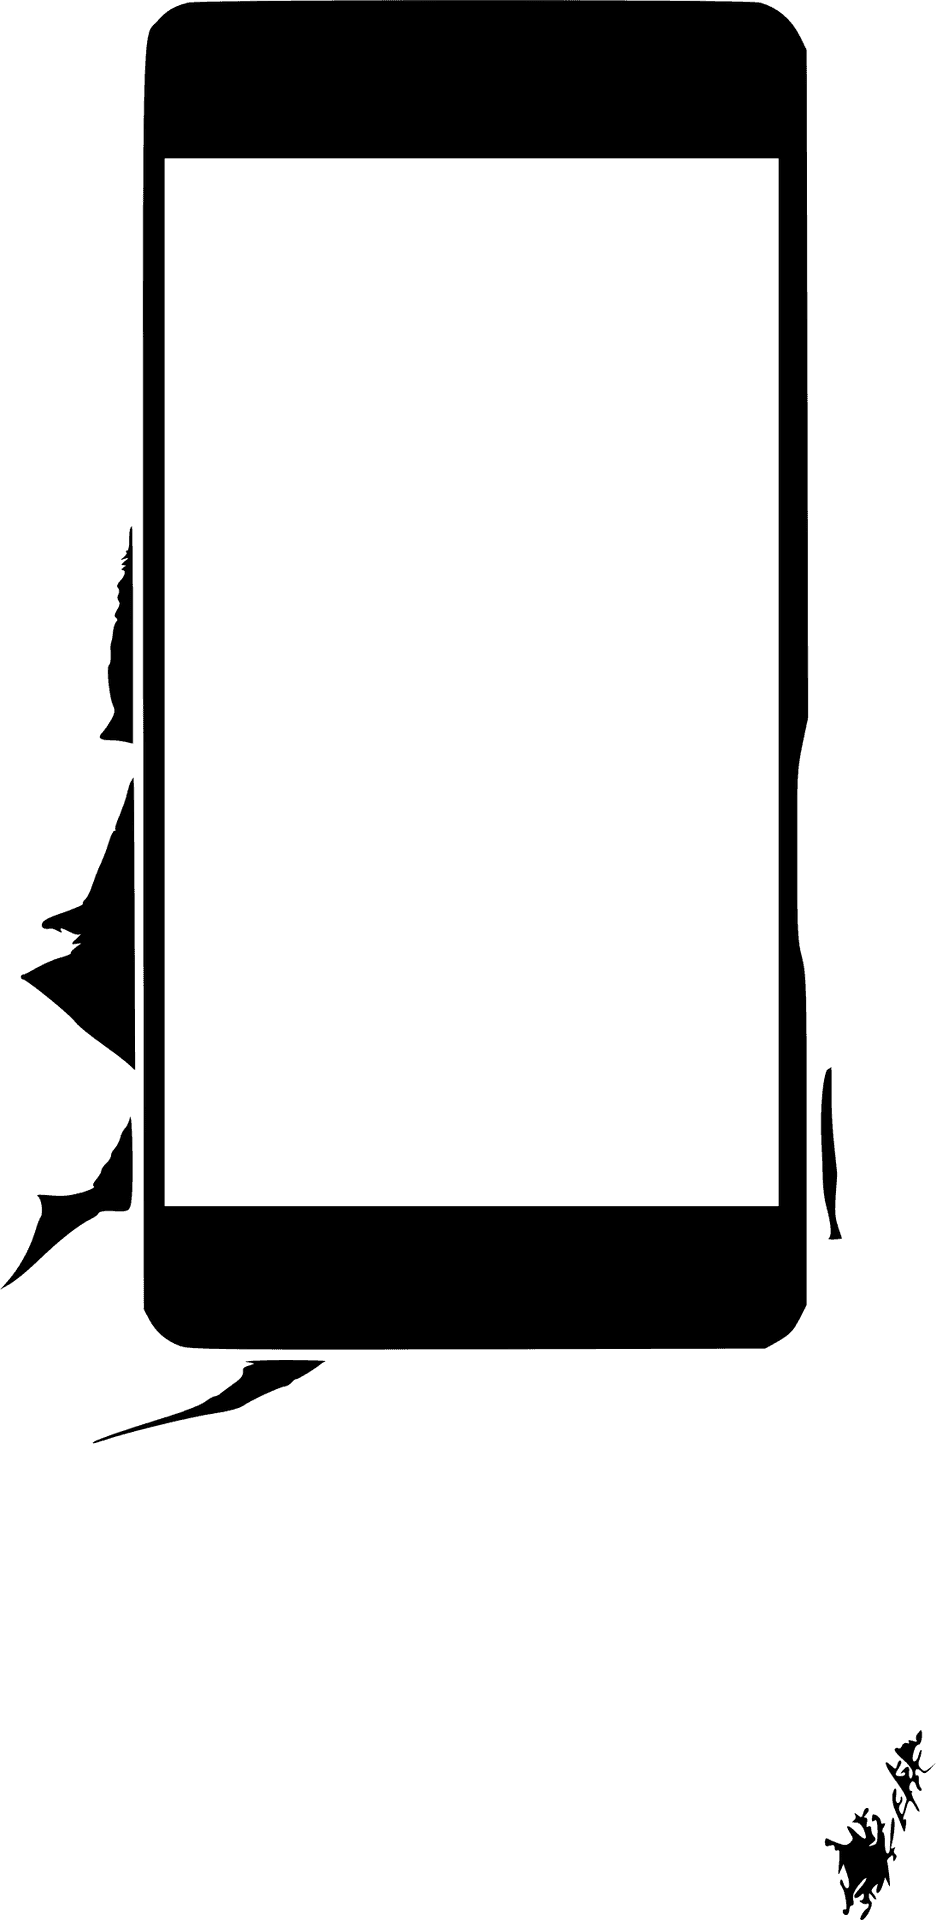 Smartphone In Hand Silhouette PNG